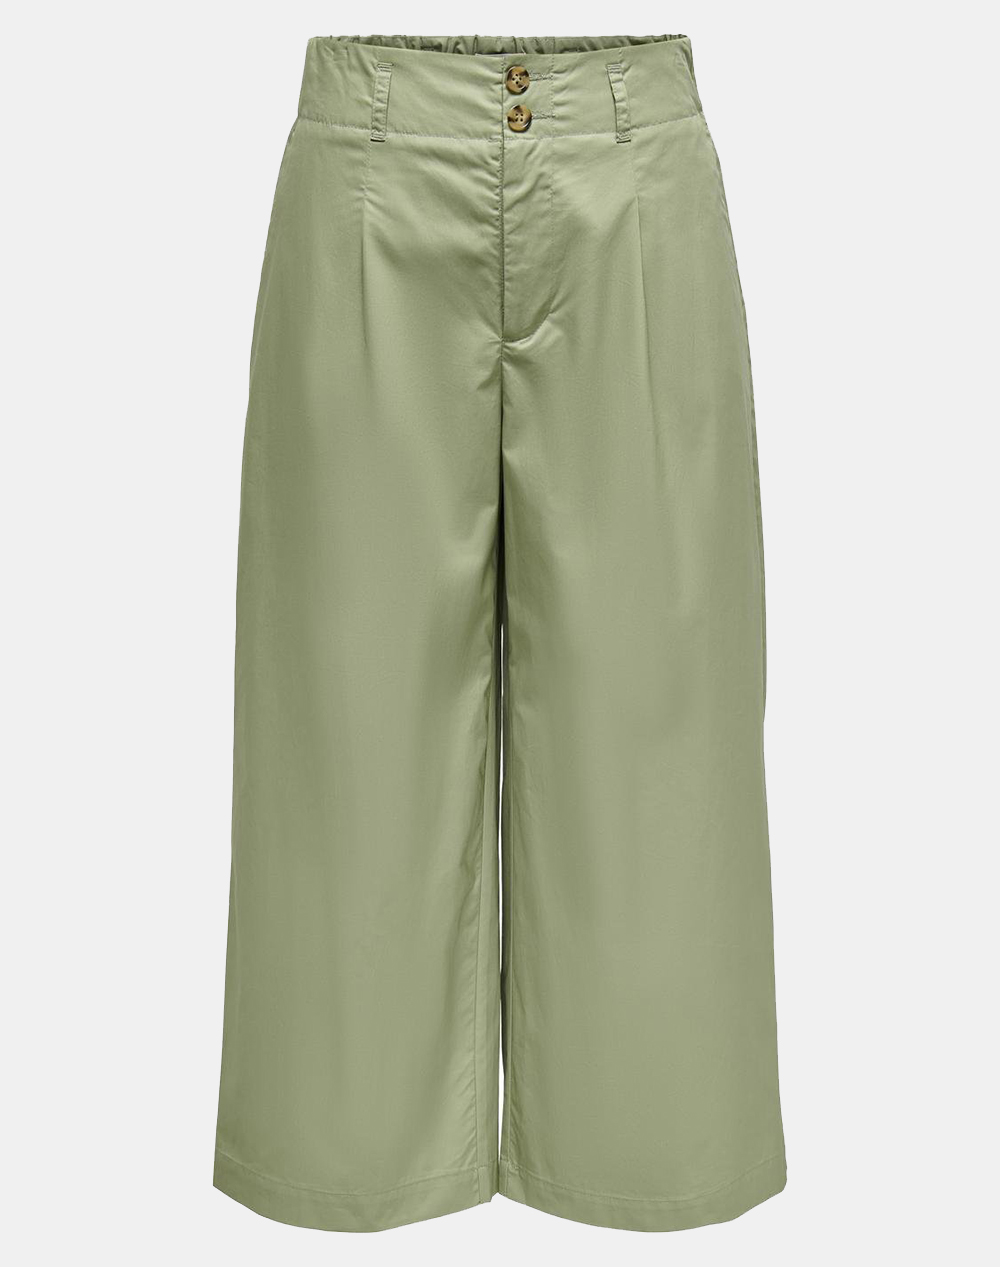 ONLY ONLZORA HW CULOTTE PANT PNT 15318619-Oil Green Olive 3810AONLY2000073_XR07280